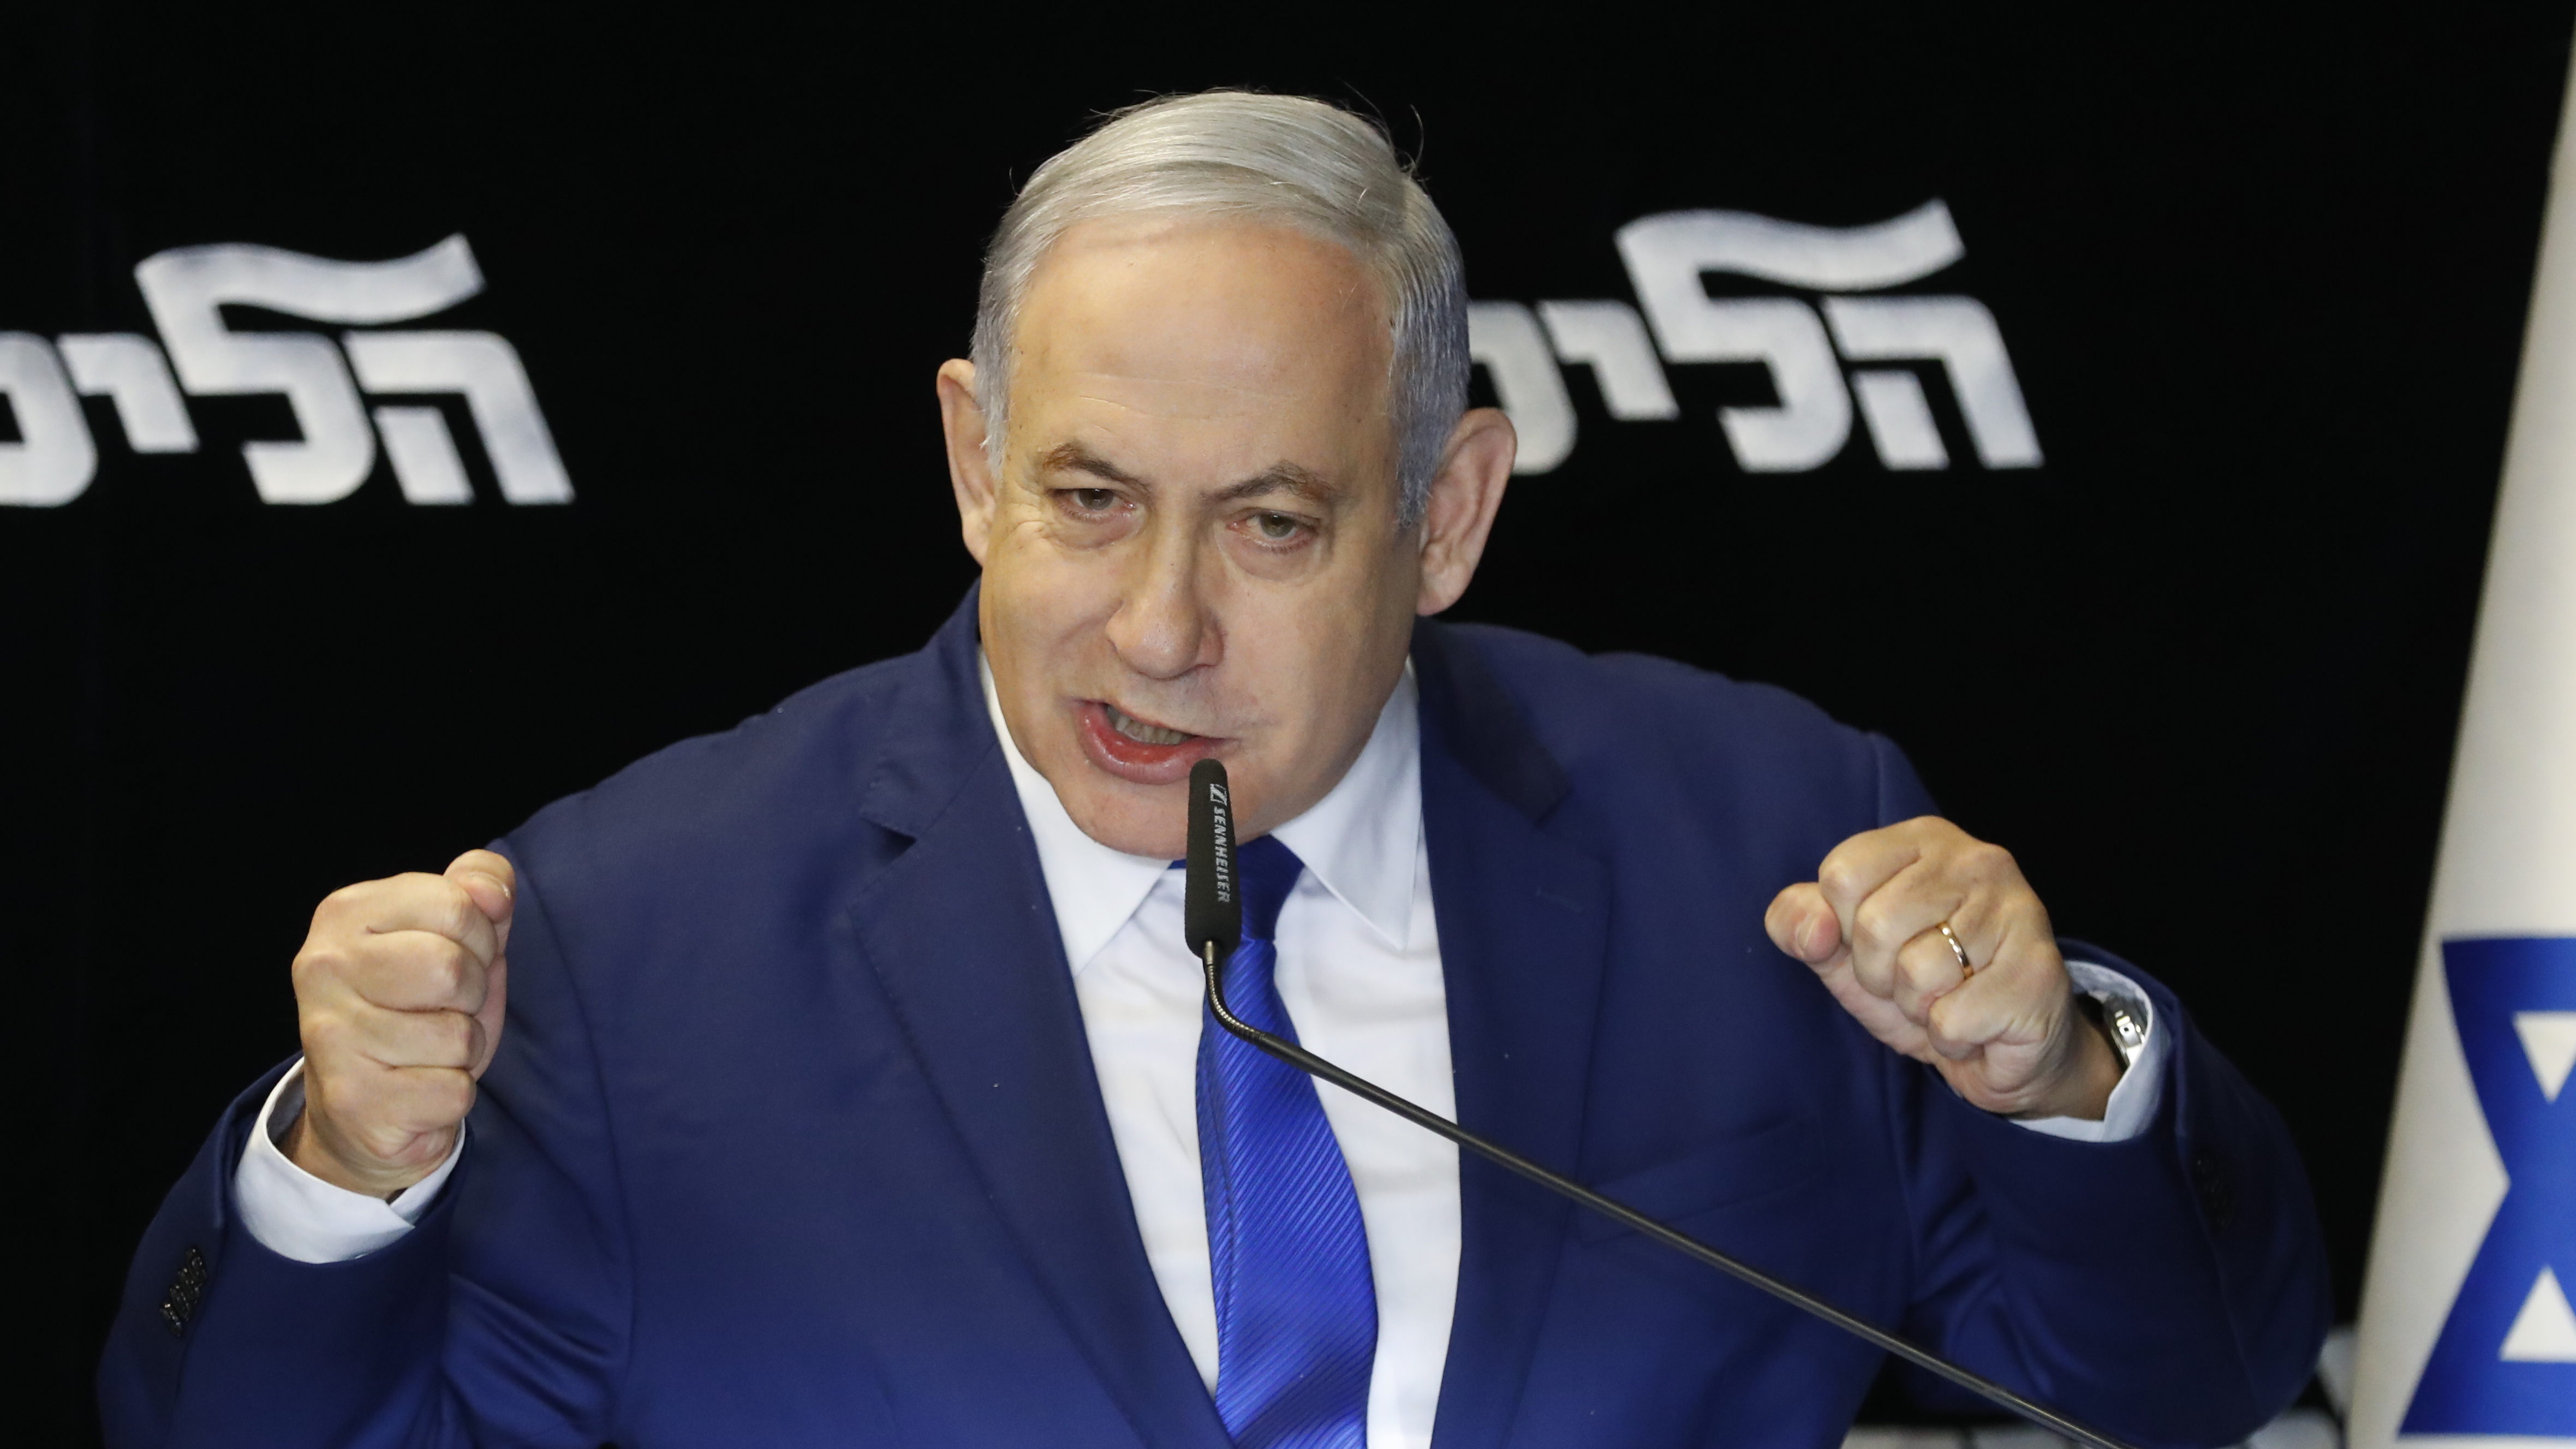 Survey Finds Most Israelis View Their Leaders as Corrupt (AUDIO INTERVIEW)